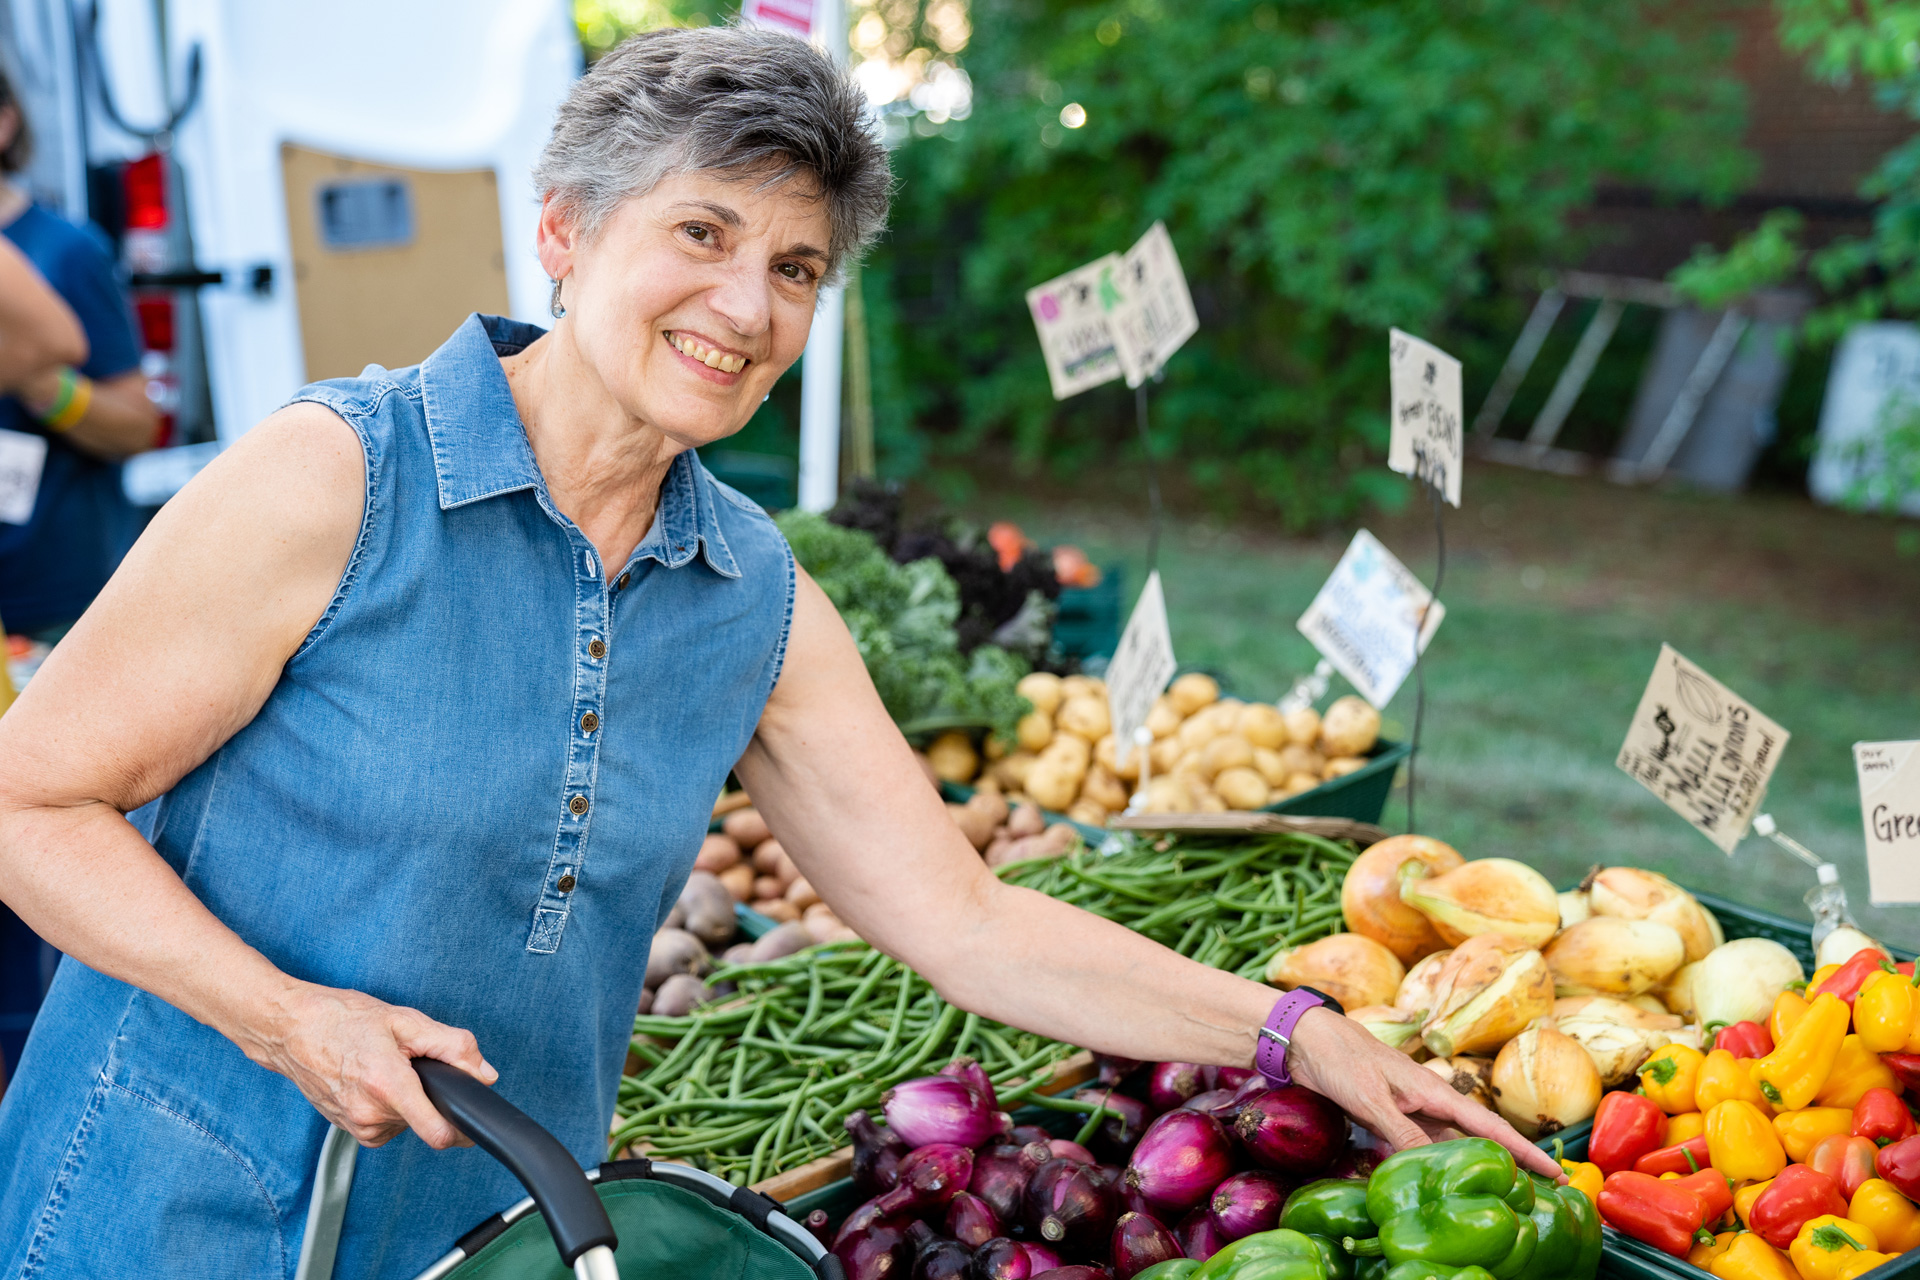 Sharri Nixon, a NH Community Loan Fund donor and invesor, shops at a local farmers market.